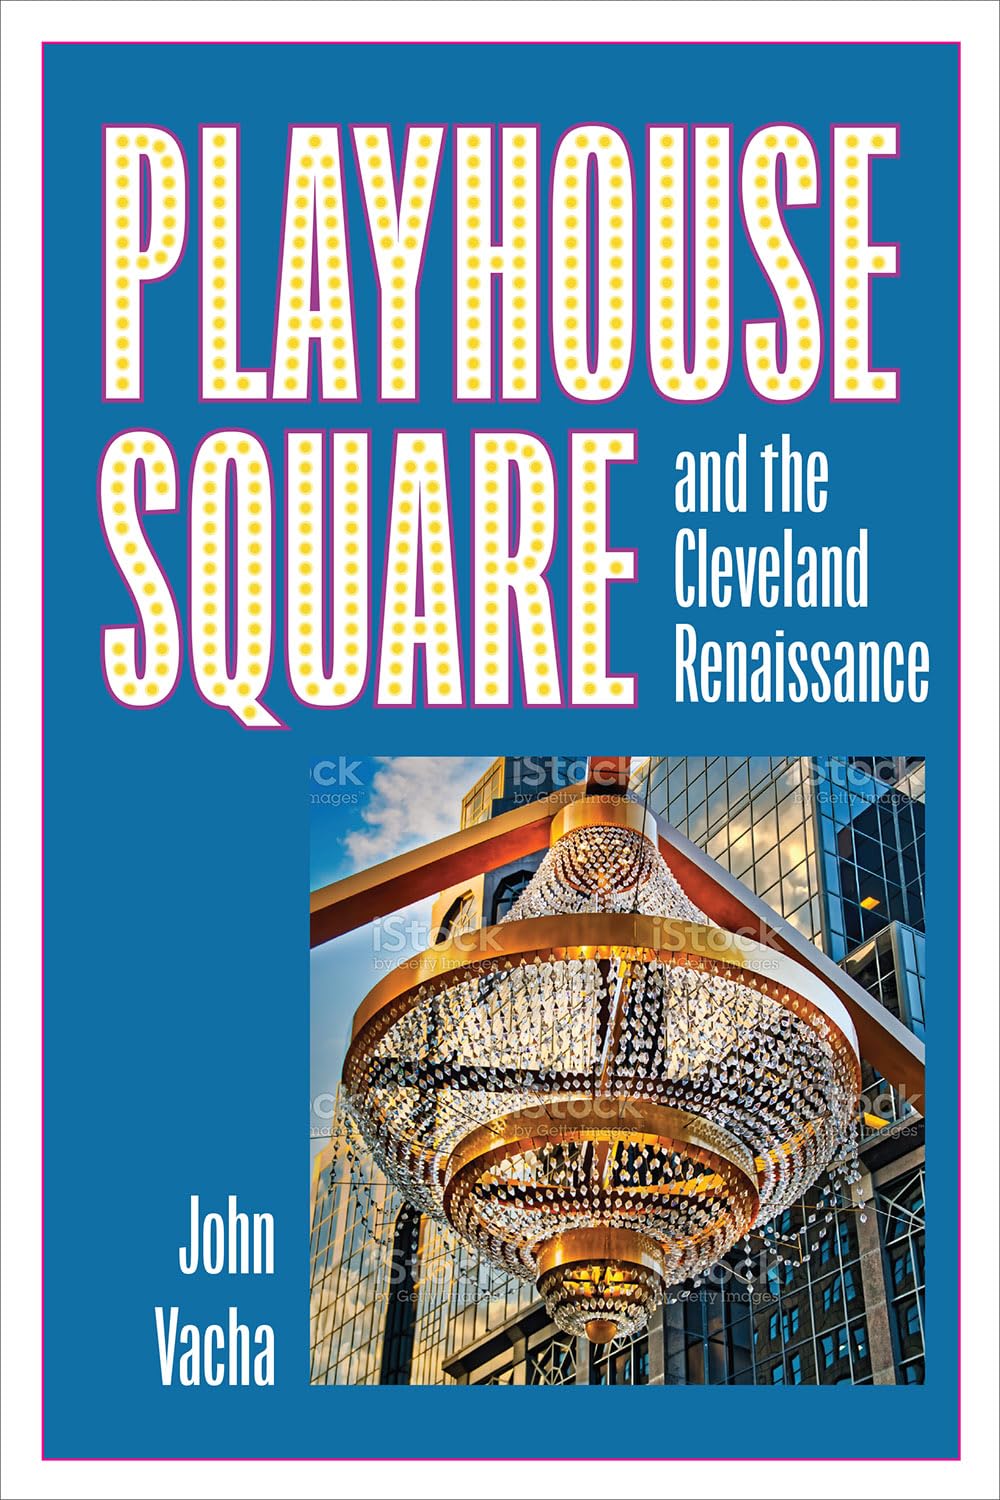 Playhouse Square and the Cleveland Renaissance by John Vacha